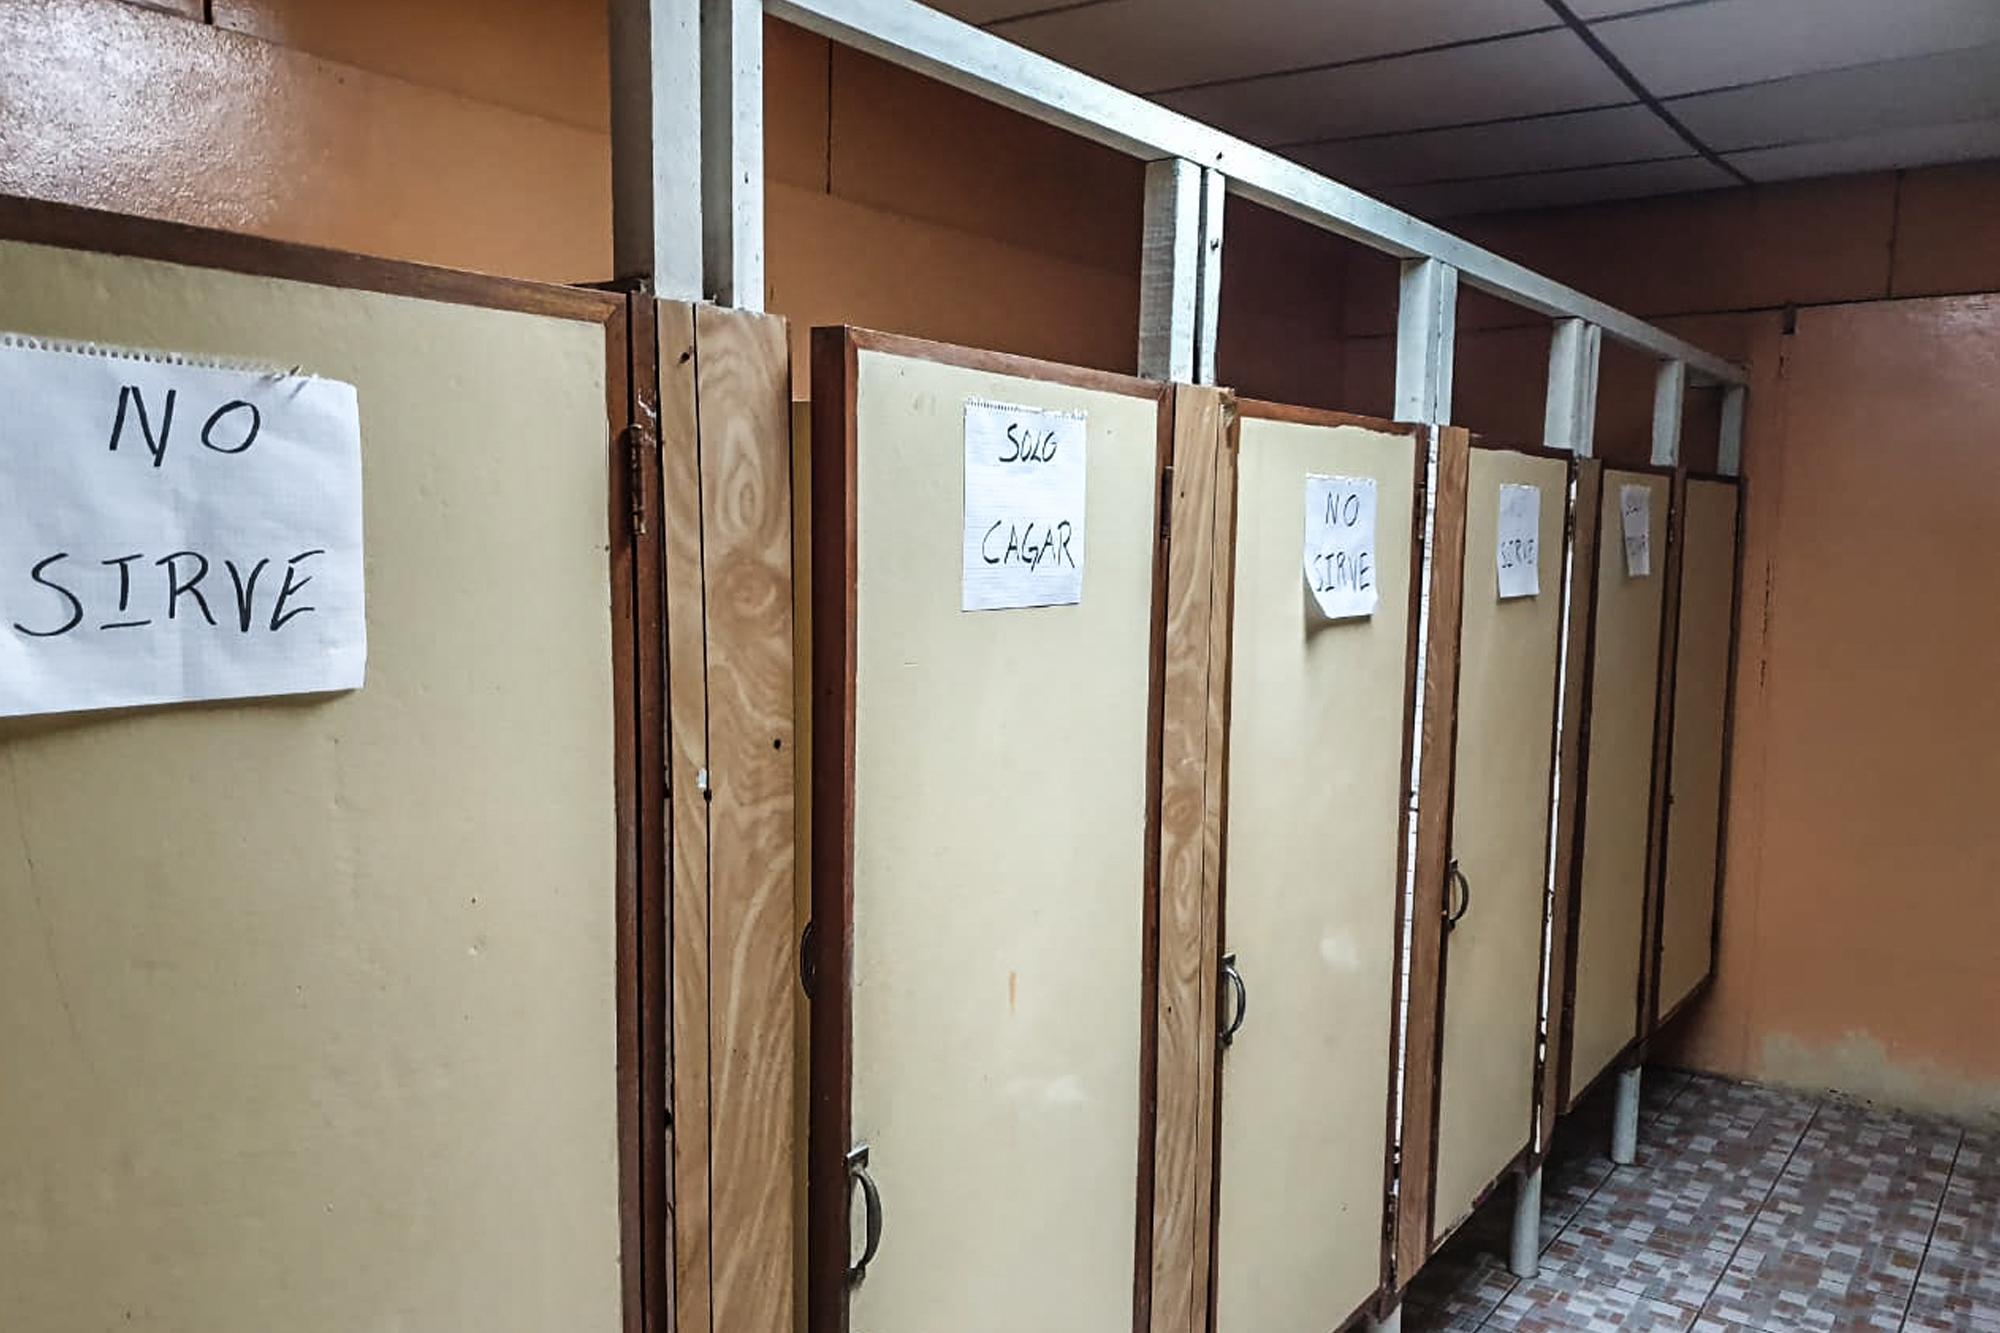 Signs read: “Out of order;” and “Shit Only.” The restroom in Villa Olímpica, a site lacking the appropriate amenities to shelter people. This facility continues to house detained Salvadorans accused of violating domestic quarantine. Image courtesy of the family.